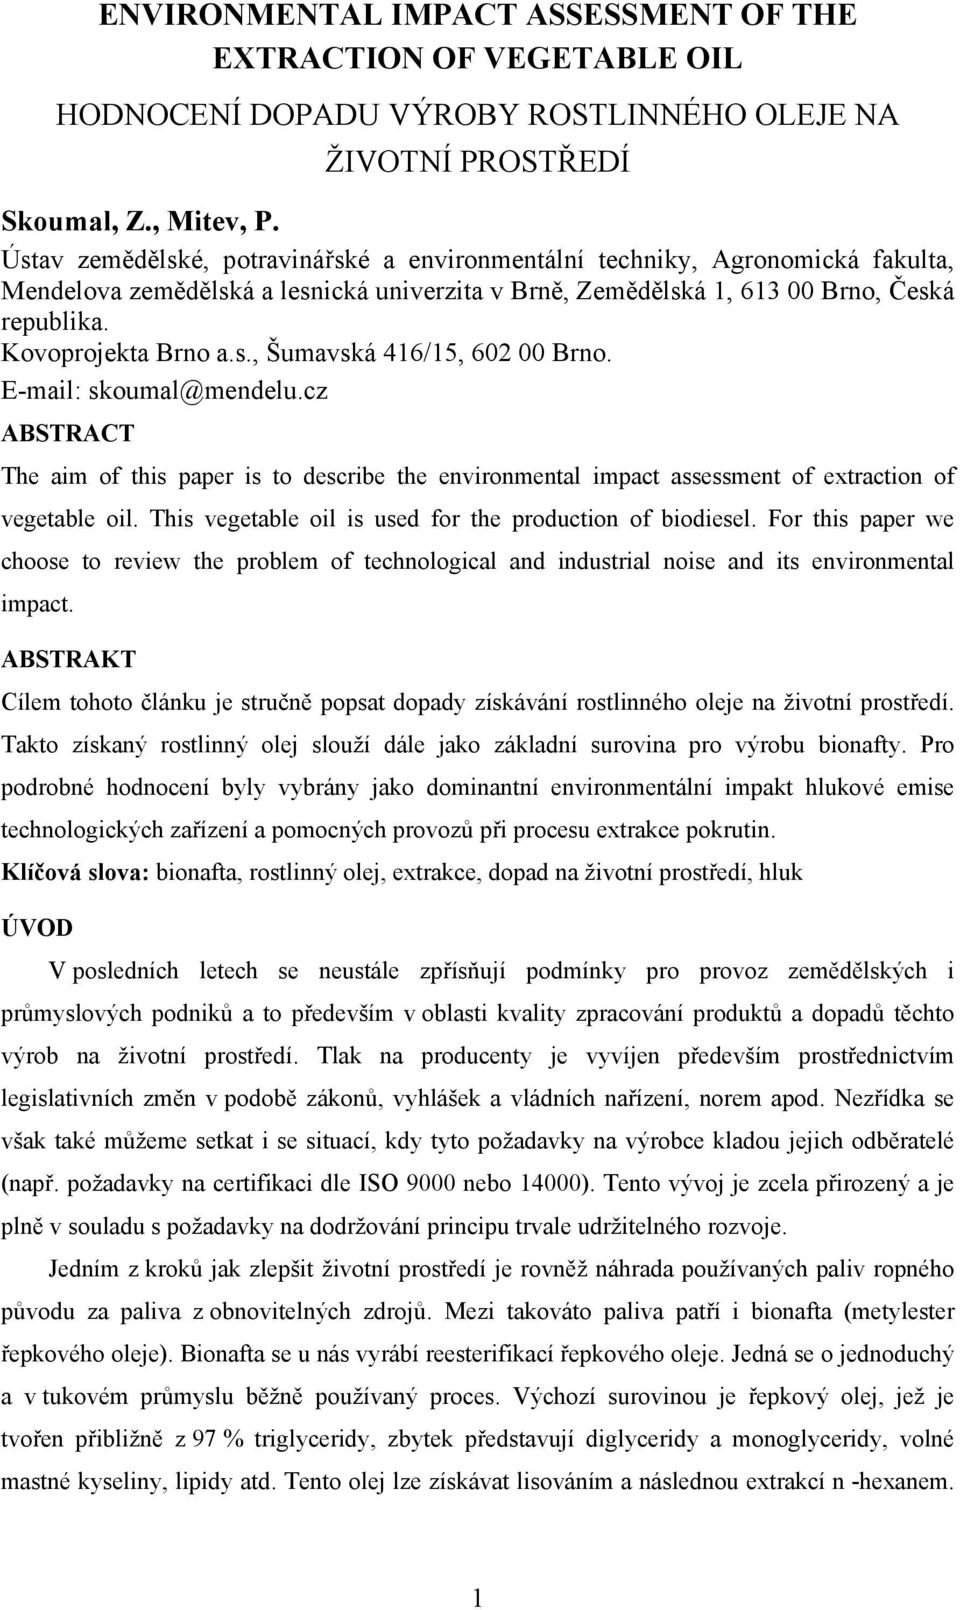 E-mail: skoumal@mendelu.cz ABSTRACT The aim of this paper is to describe the environmental impact assessment of extraction of vegetable oil. This vegetable oil is used for the production of biodiesel.